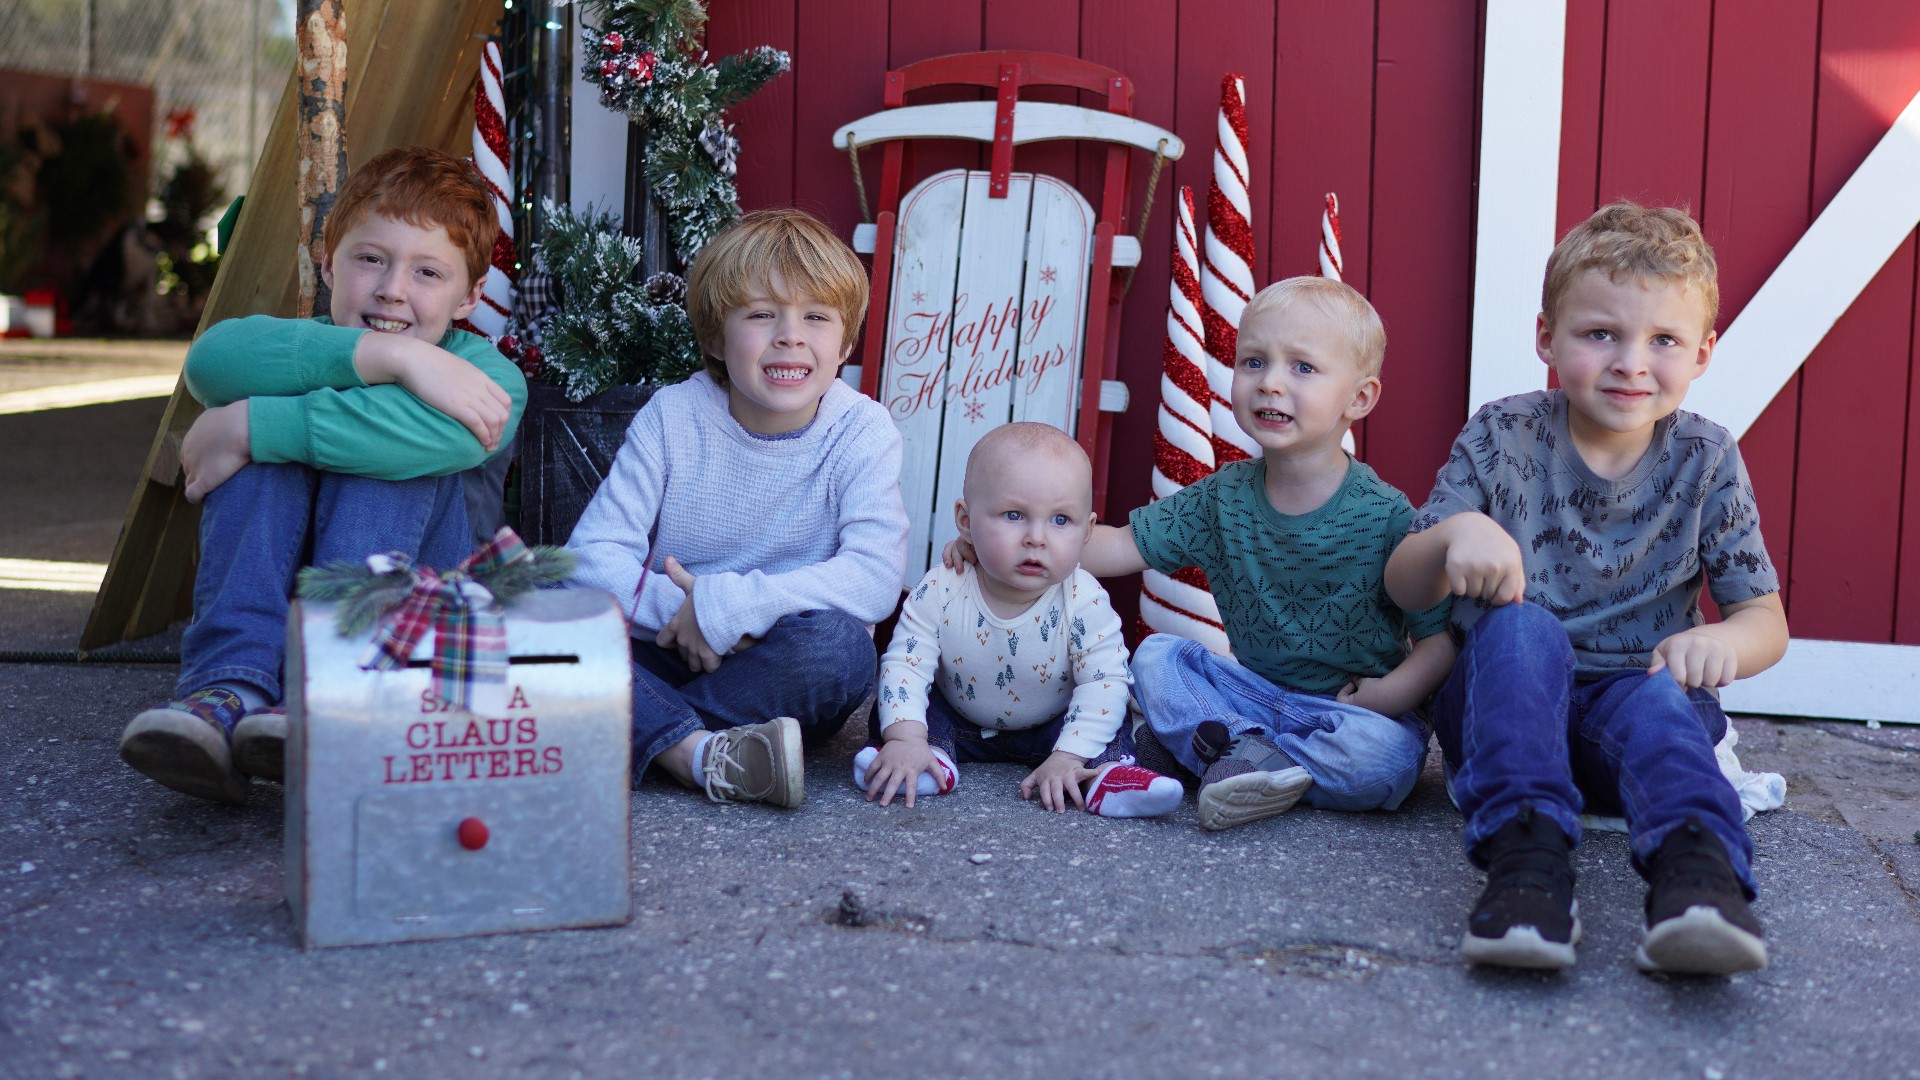 Attempting to get the perfect holiday photo with five boy cousins under age 9 is a challenge.